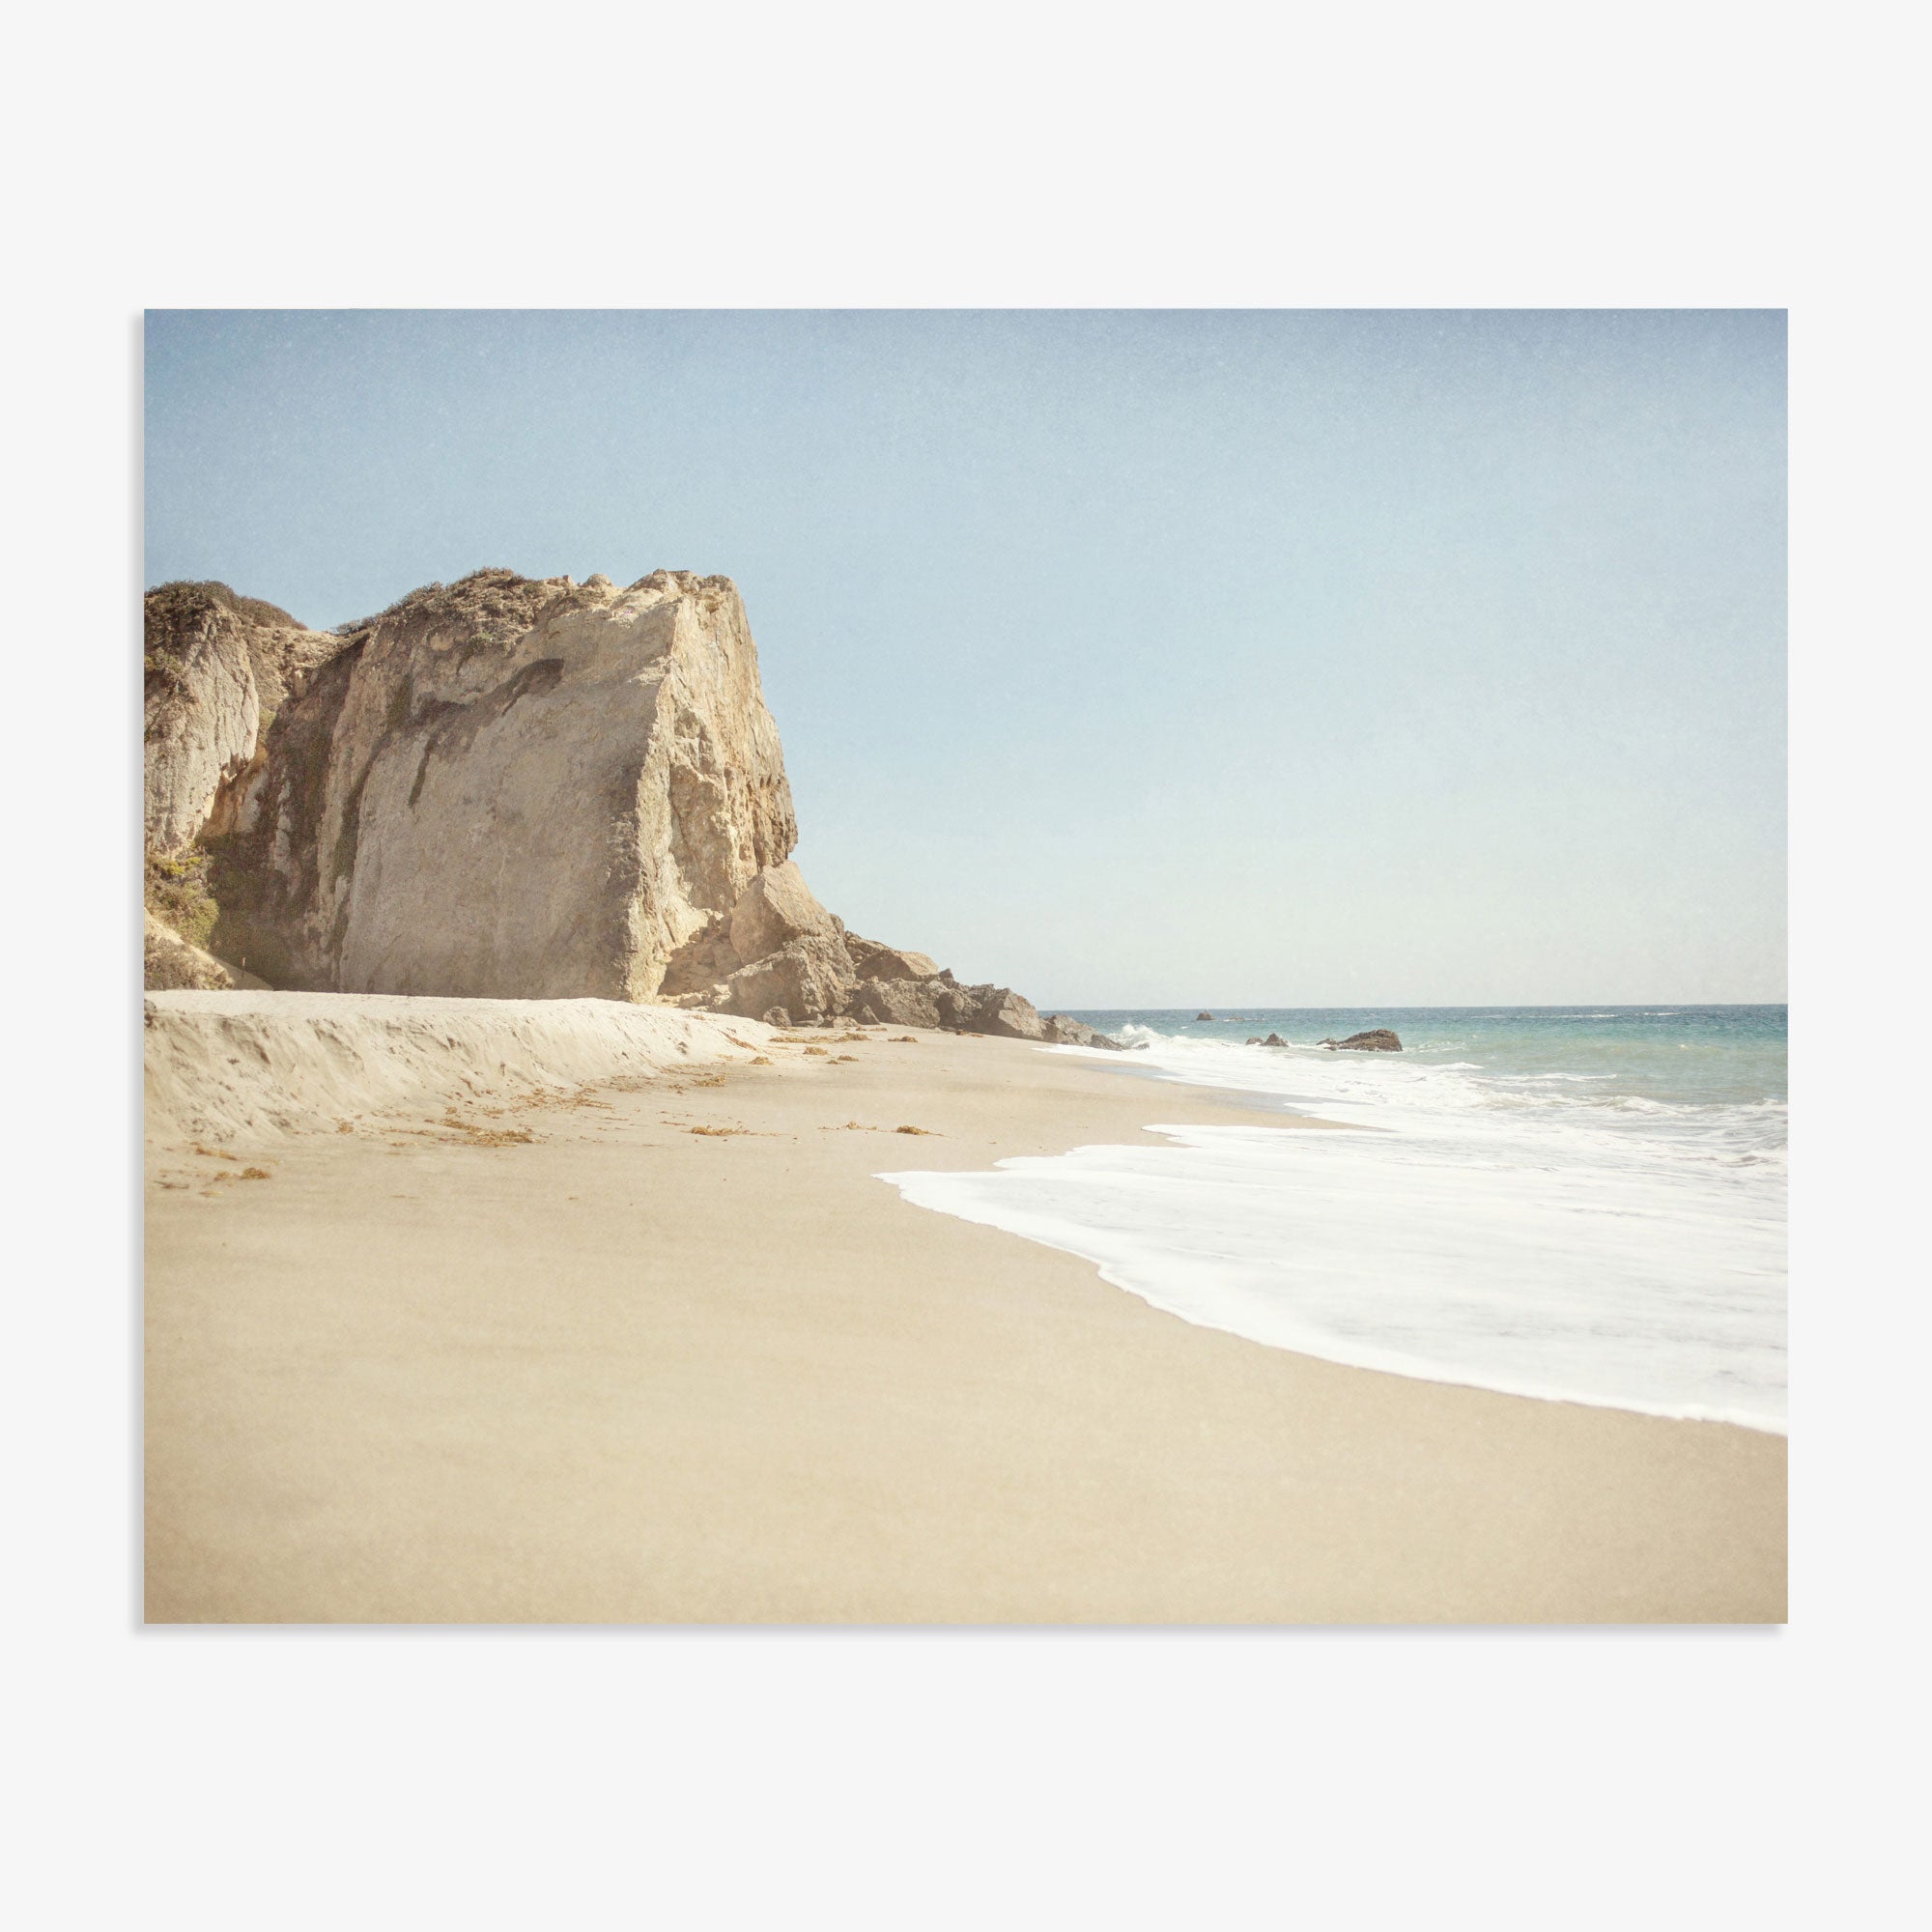 A serene Offley Green California Malibu Print, &#39;Point Dume&#39; beach scene with soft waves lapping at the shore, a large cliff to the left, and a clear blue sky. The setting conveys a peaceful, natural coastal landscape.